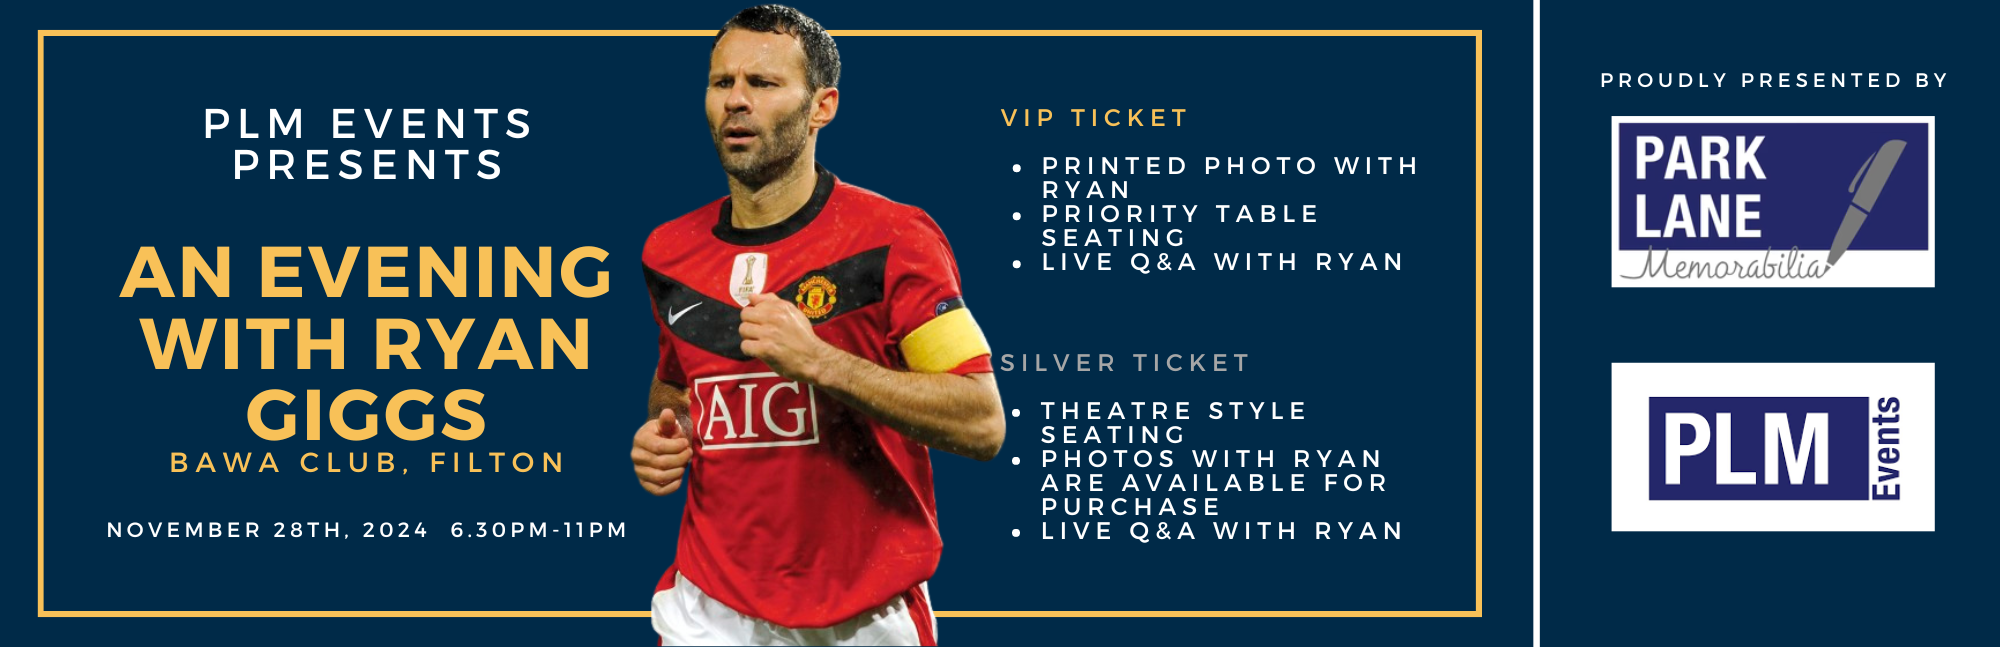 an evening with ryan giggs